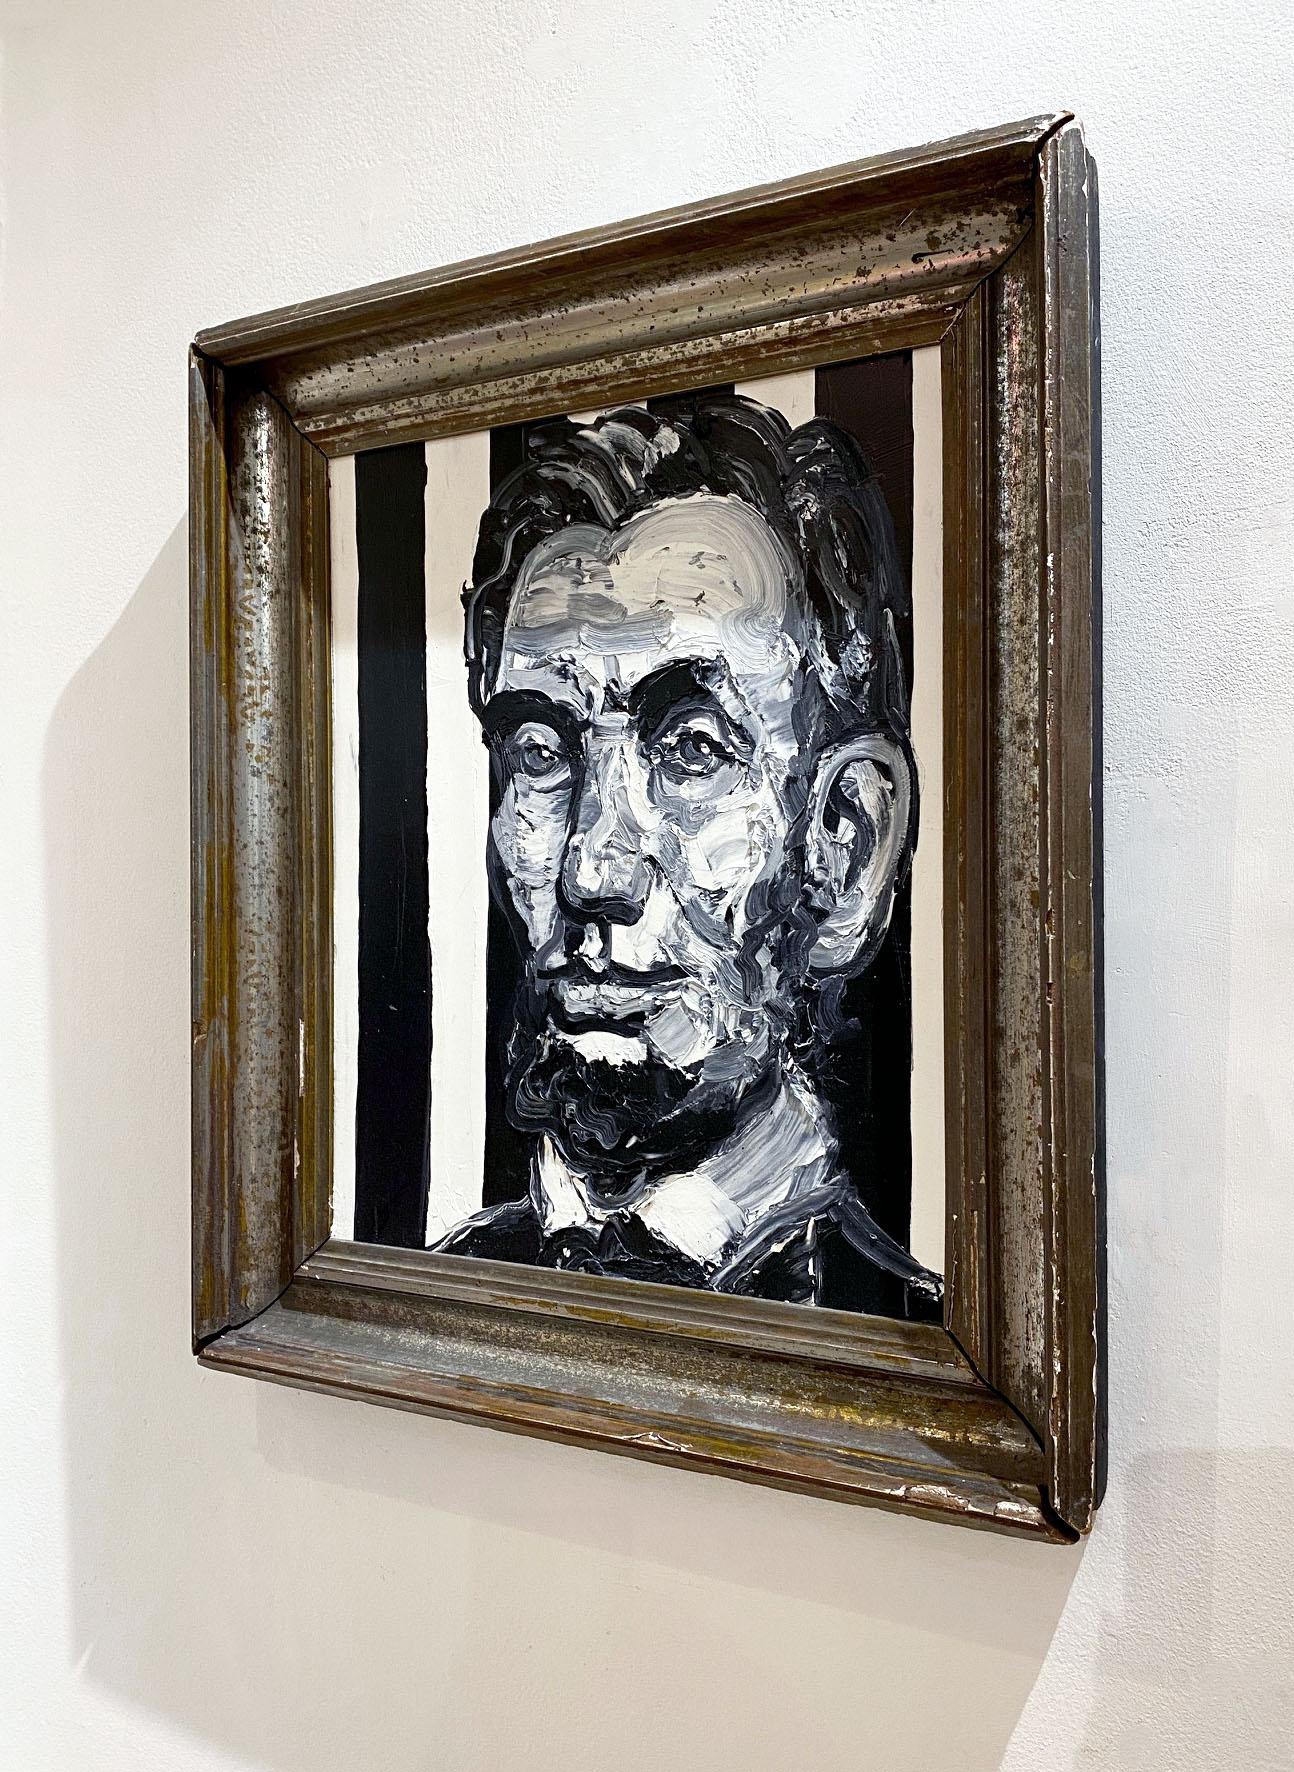 Pres Lincoln - Painting by Hunt Slonem